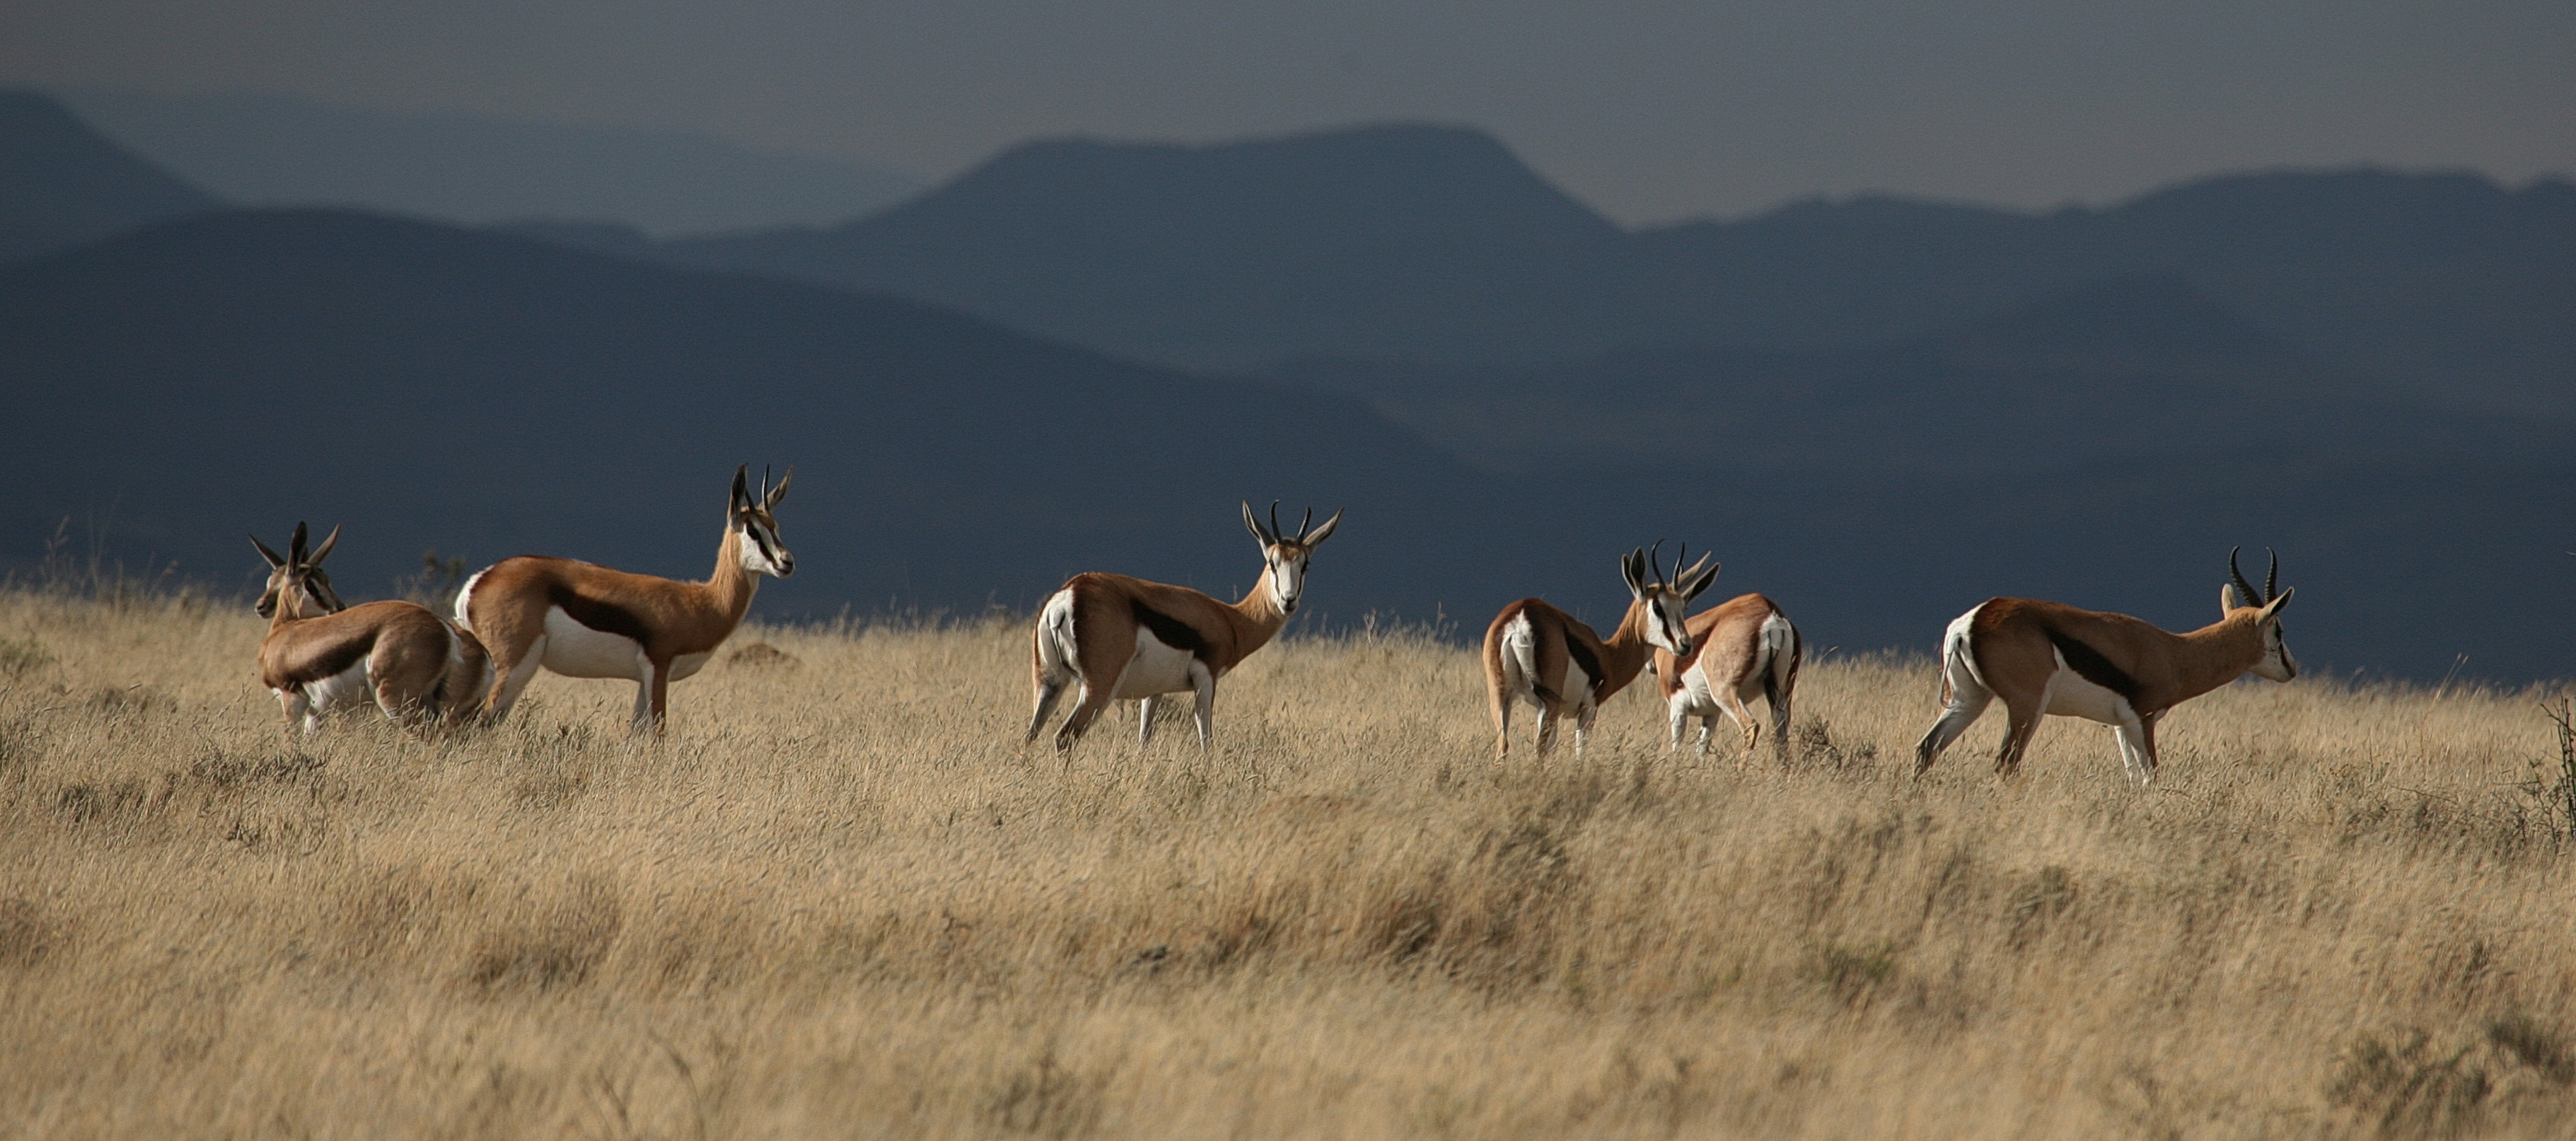 Explorers and hunters alike were entranced by this delicate, beautiful but tough antelope. Image: Chris Marais